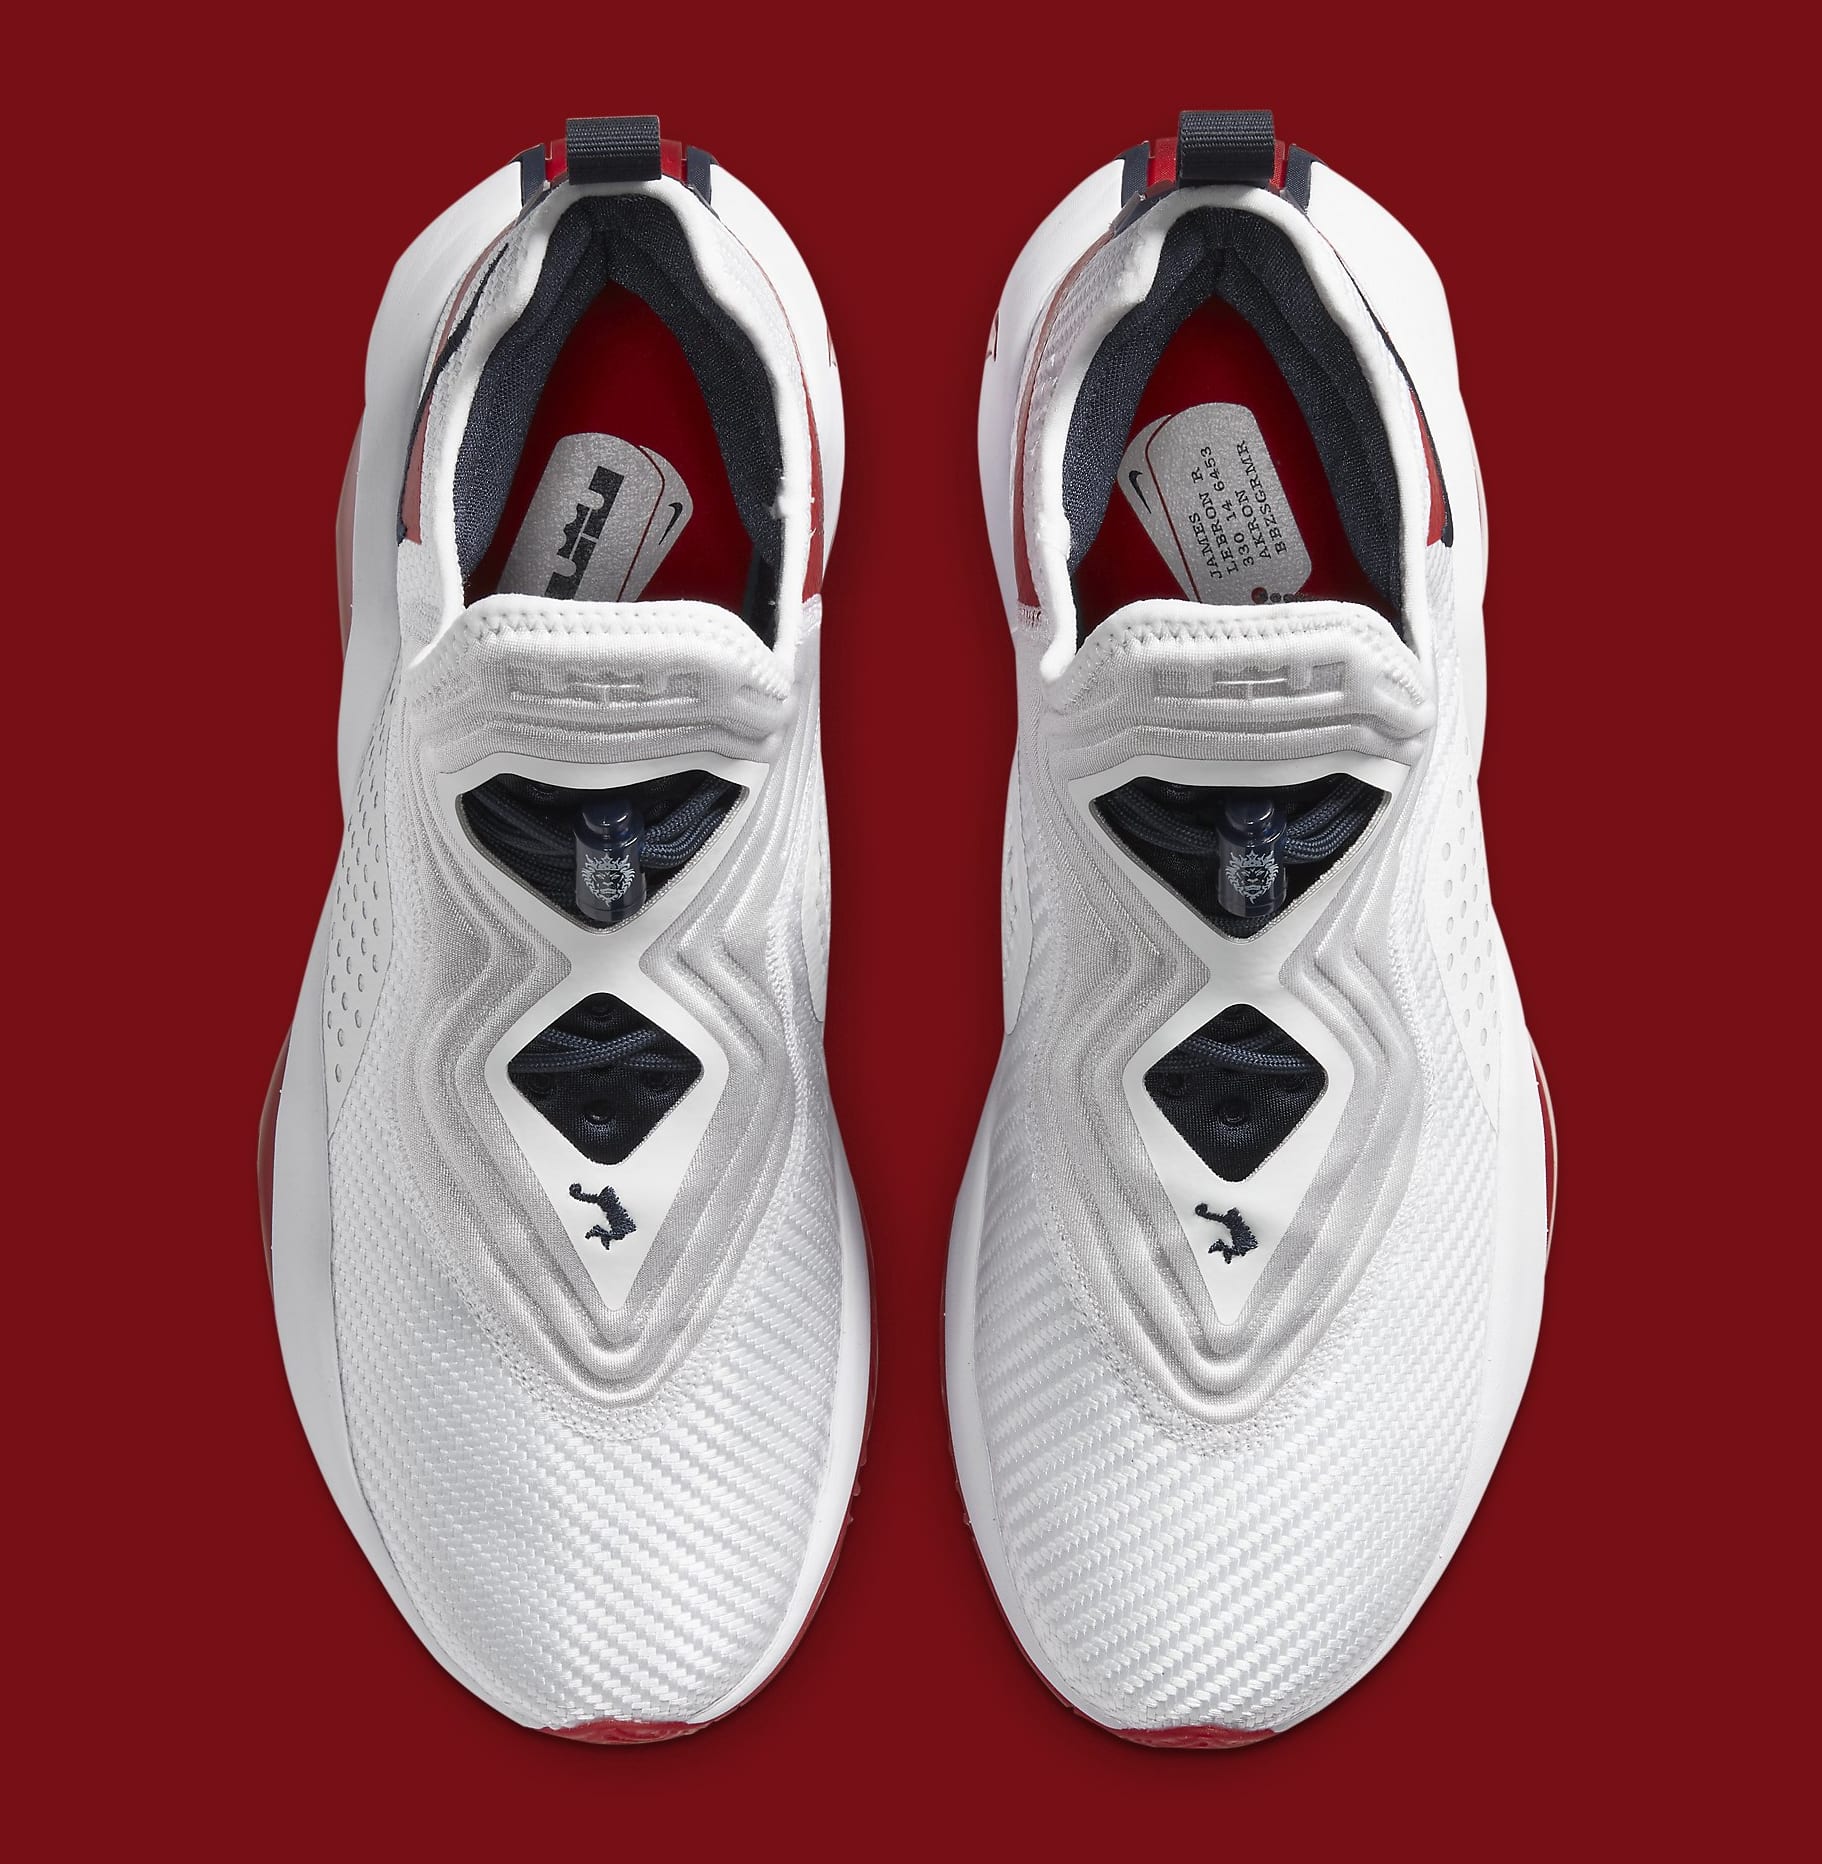 Nike LeBron Soldier 14 White/University Red-Team Red CK6024-100 Top